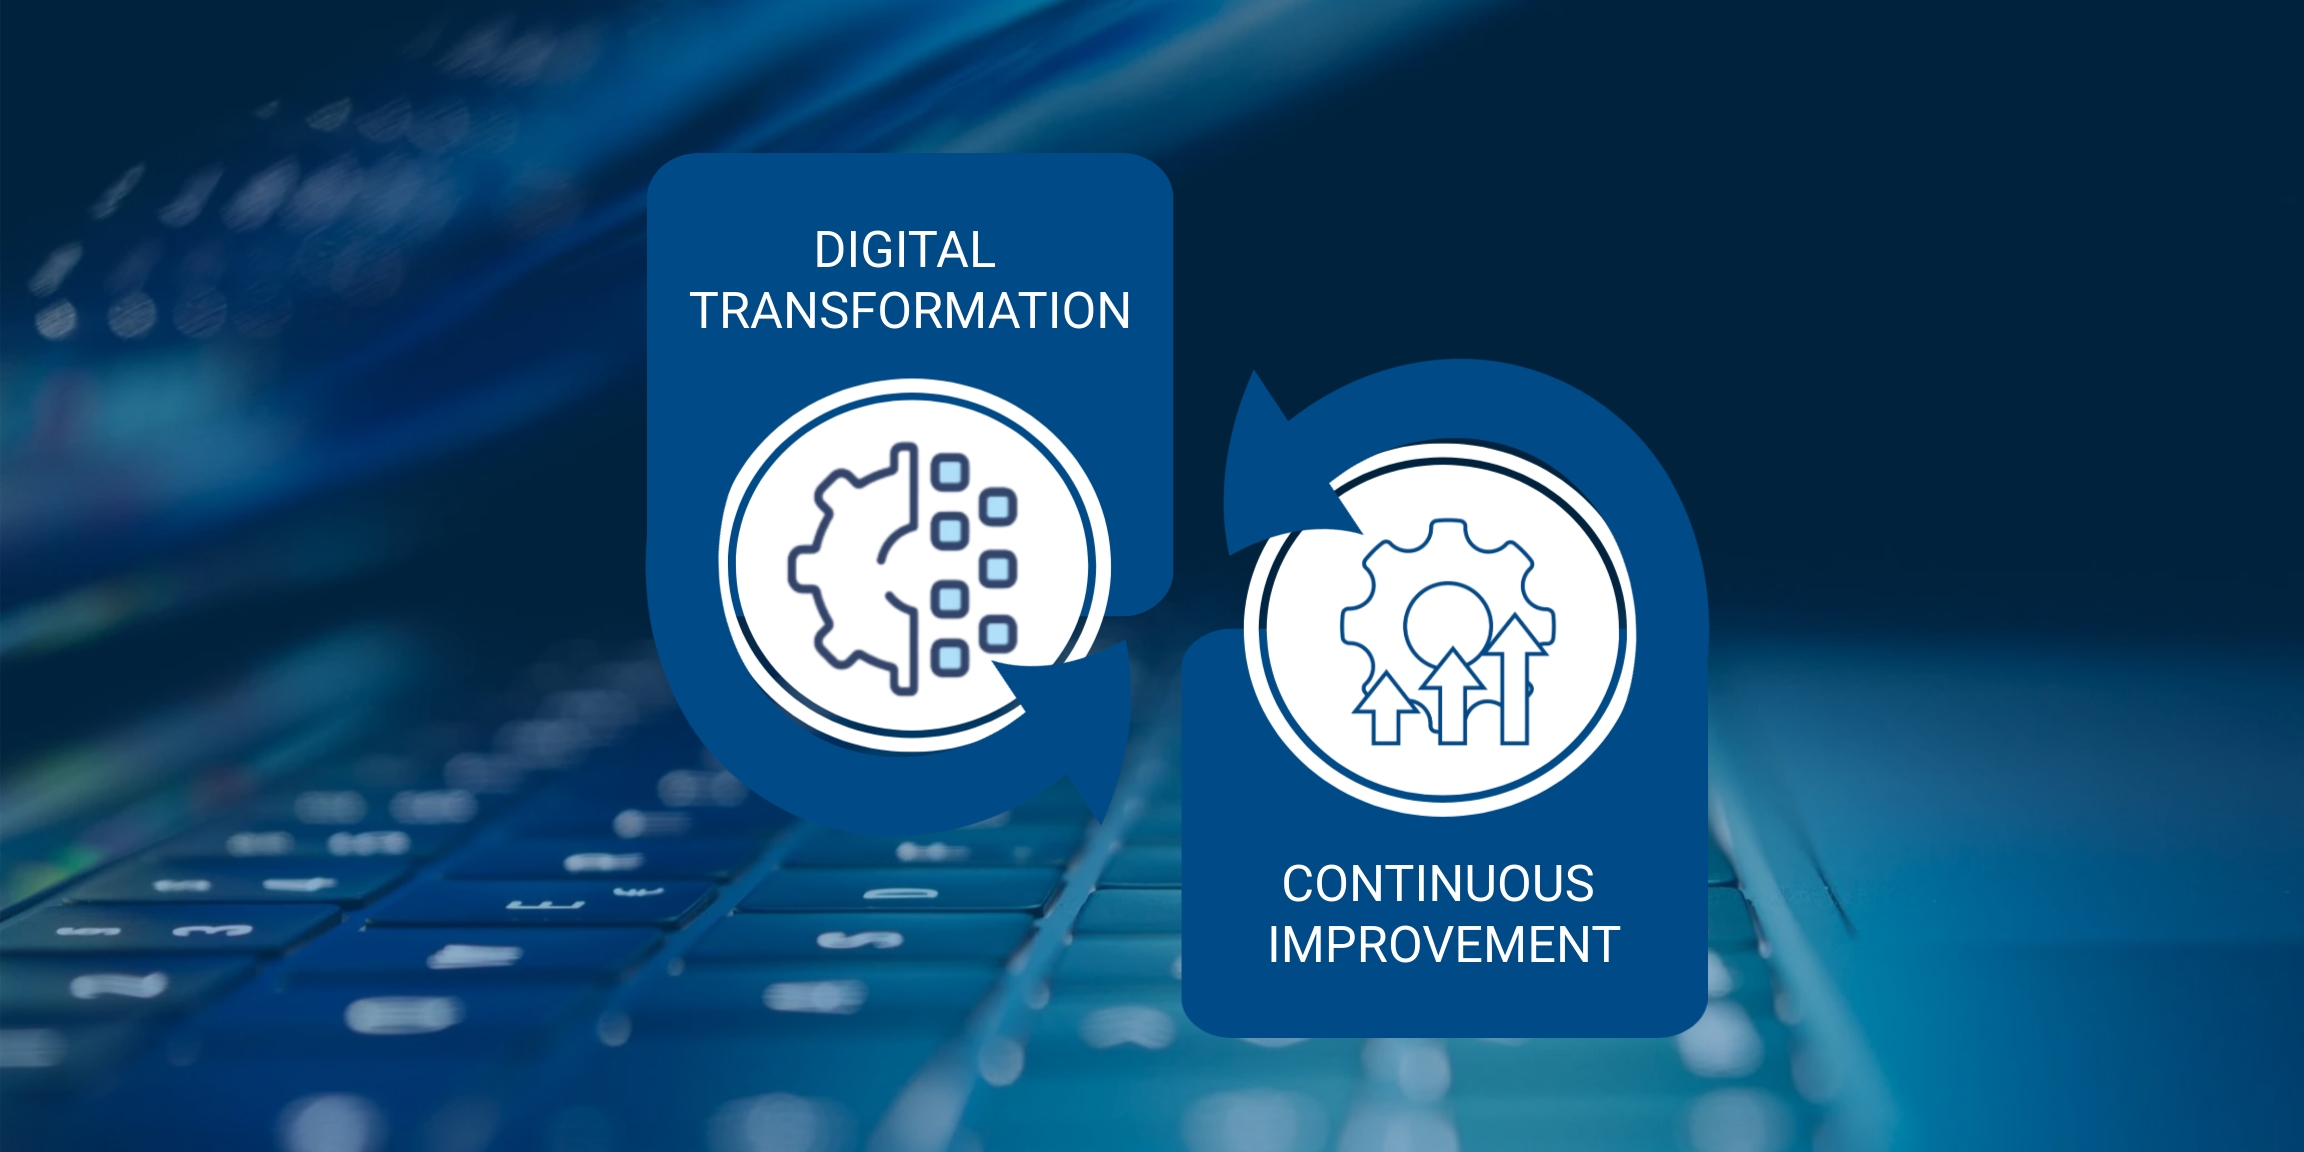 Bassett Mechanical Transformation Office: Digital Transformation and Continuous Improvement